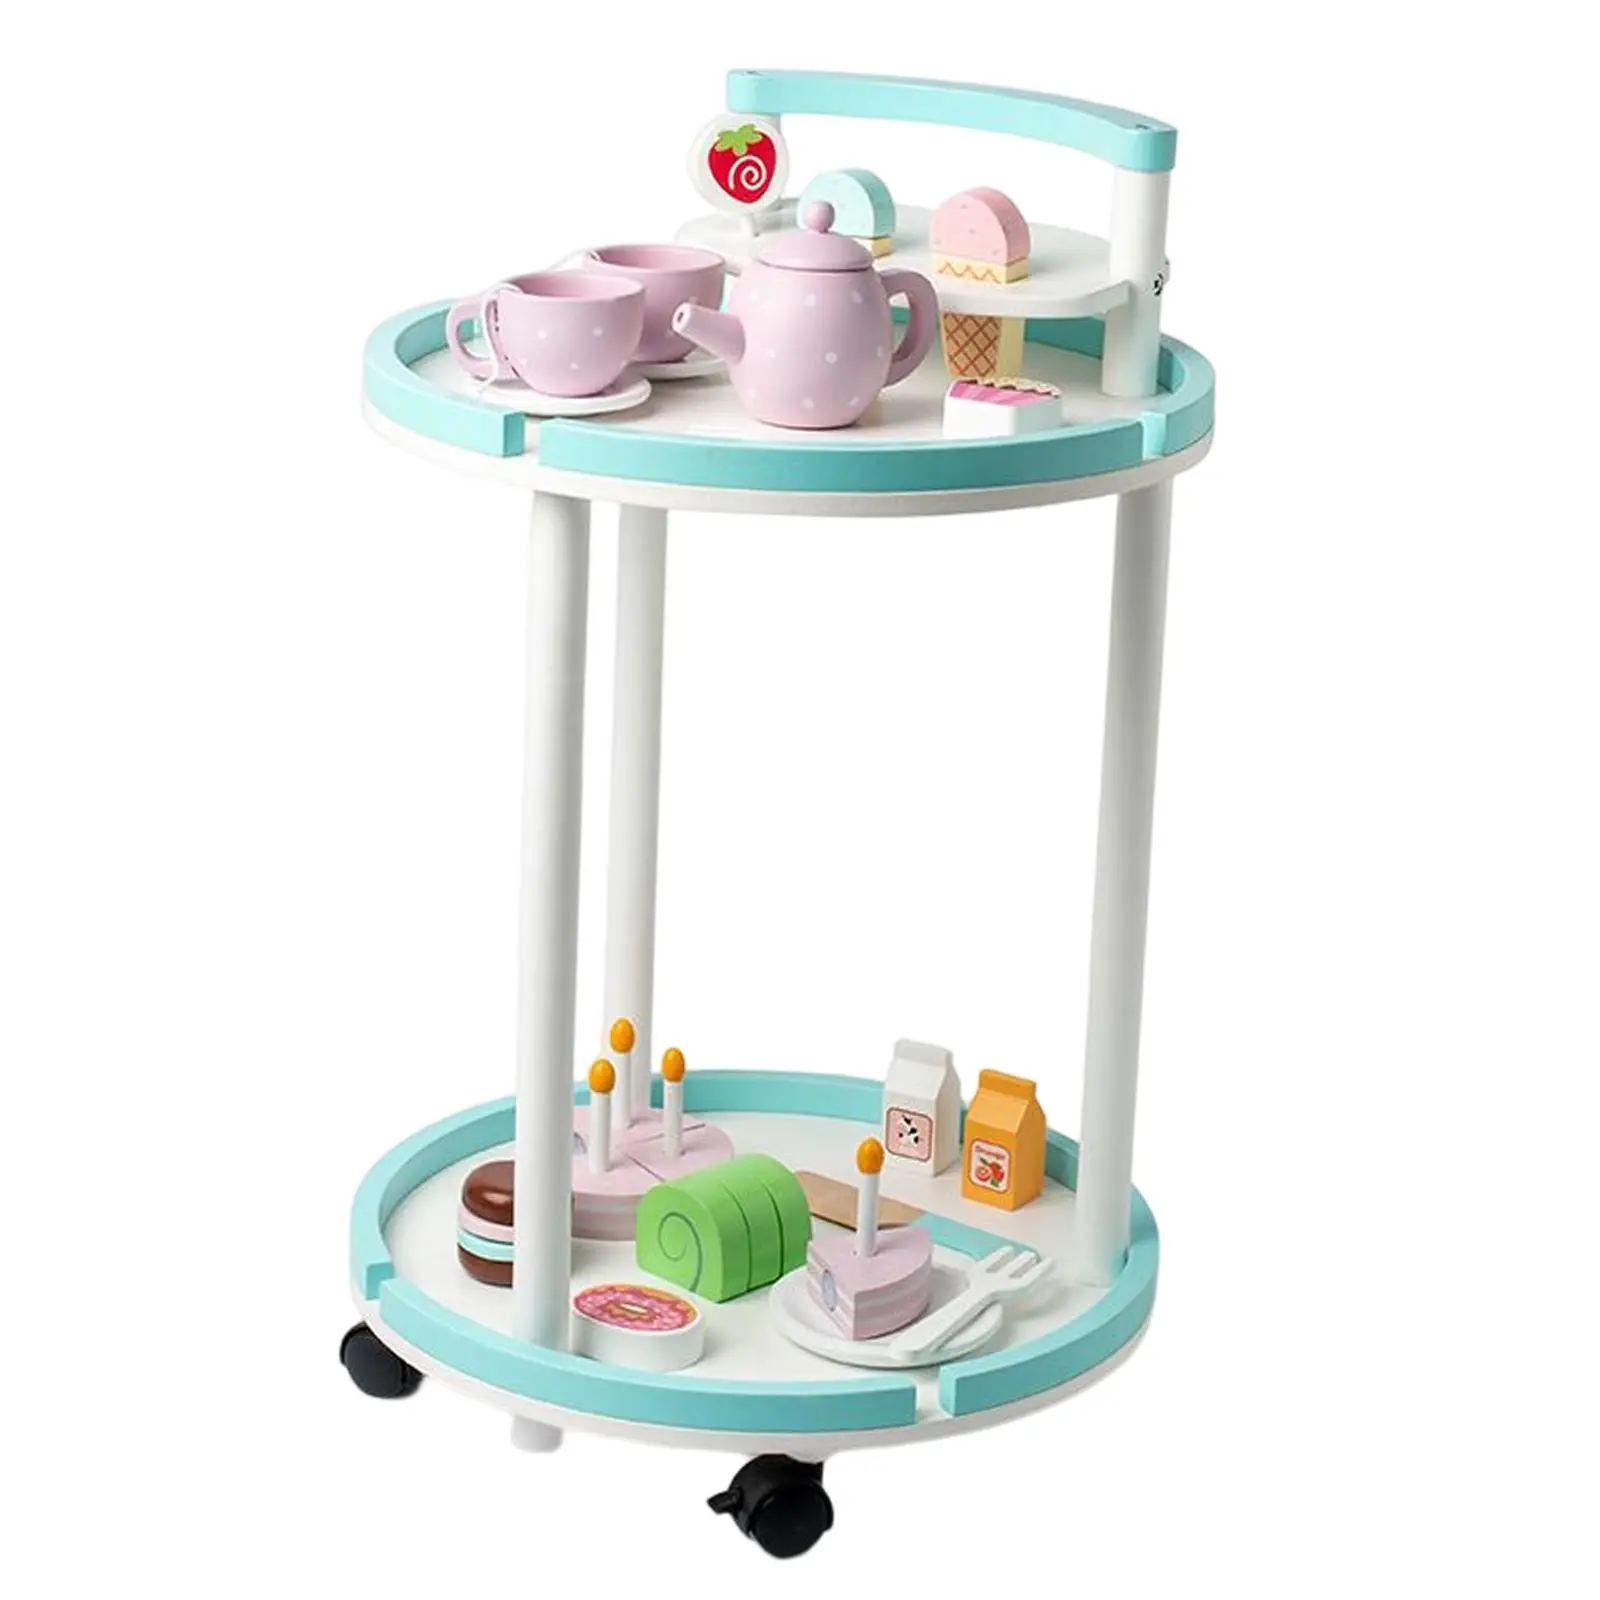 Miniature Play House Playset Gifts Scene Model Afternoon Tea Trolley Toy for Kindergarten